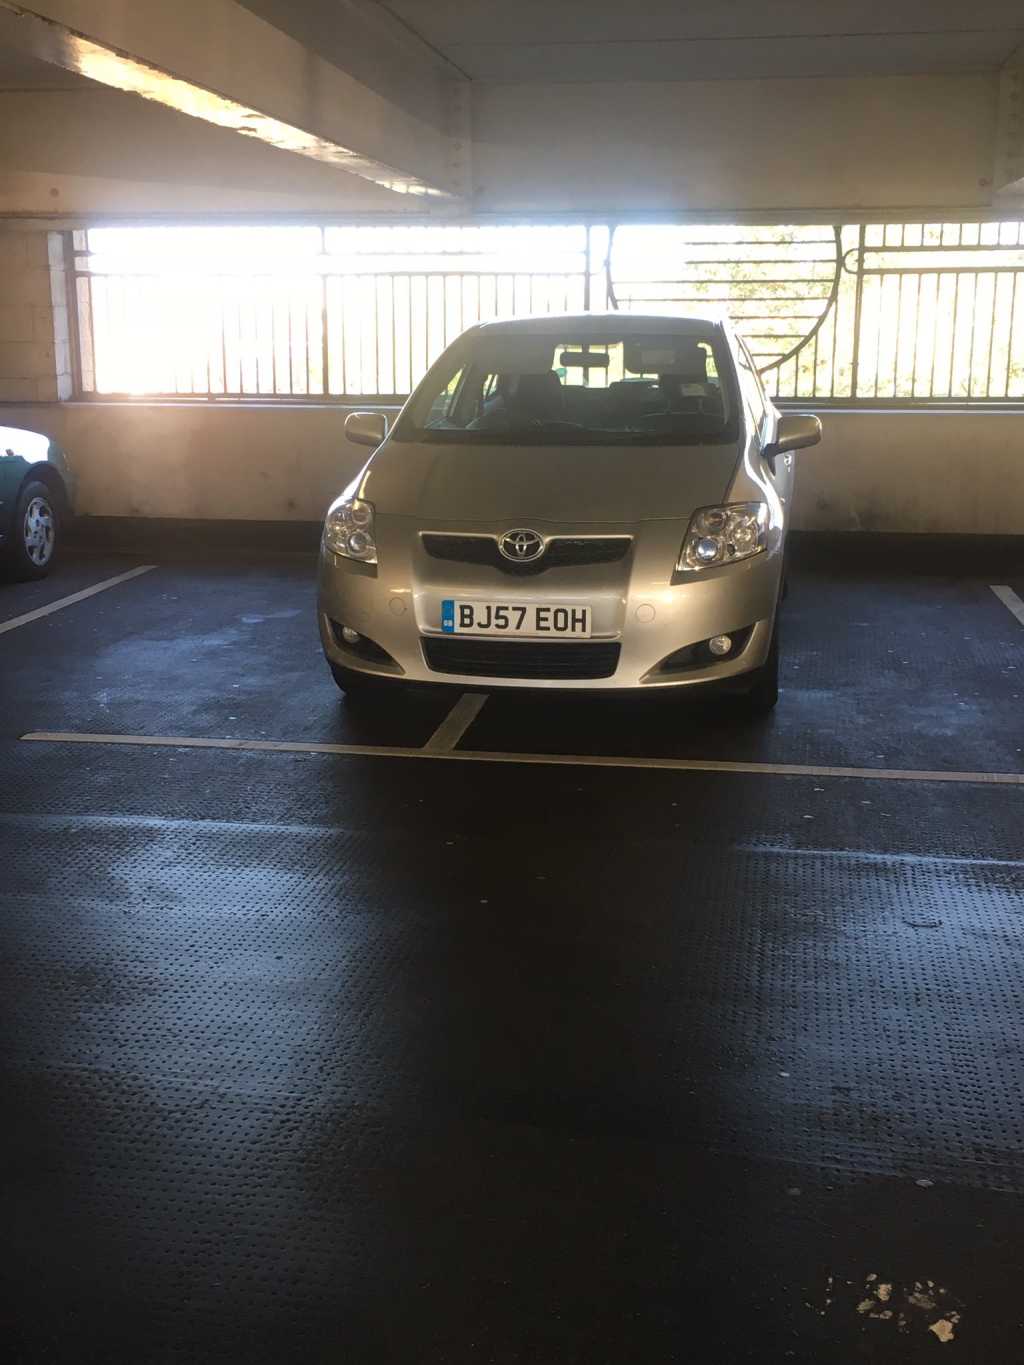 BJ57 EOH is an Inconsiderate Parker